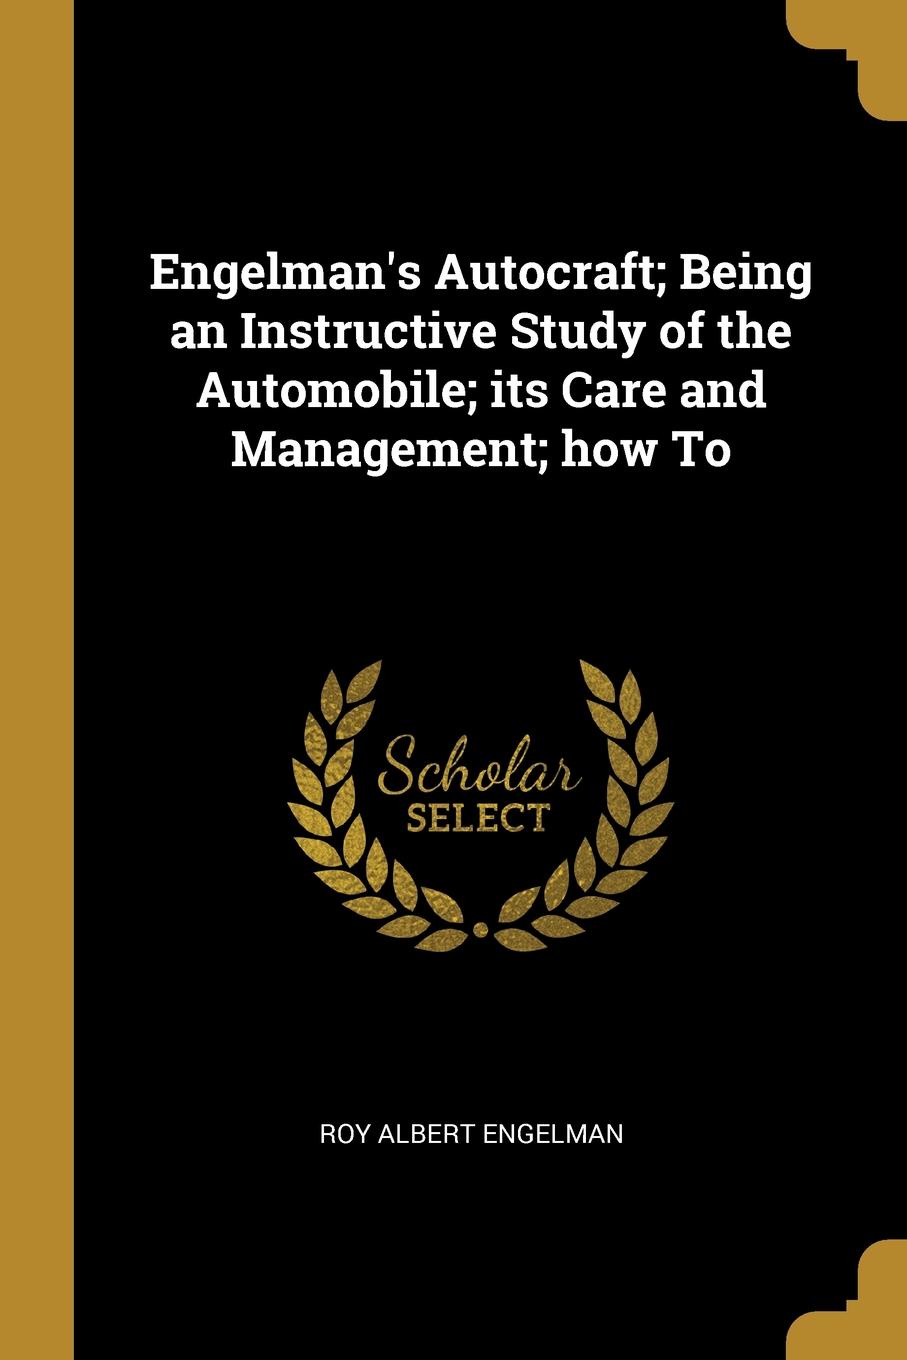 Engelman.s Autocraft; Being an Instructive Study of the Automobile; its Care and Management; how To